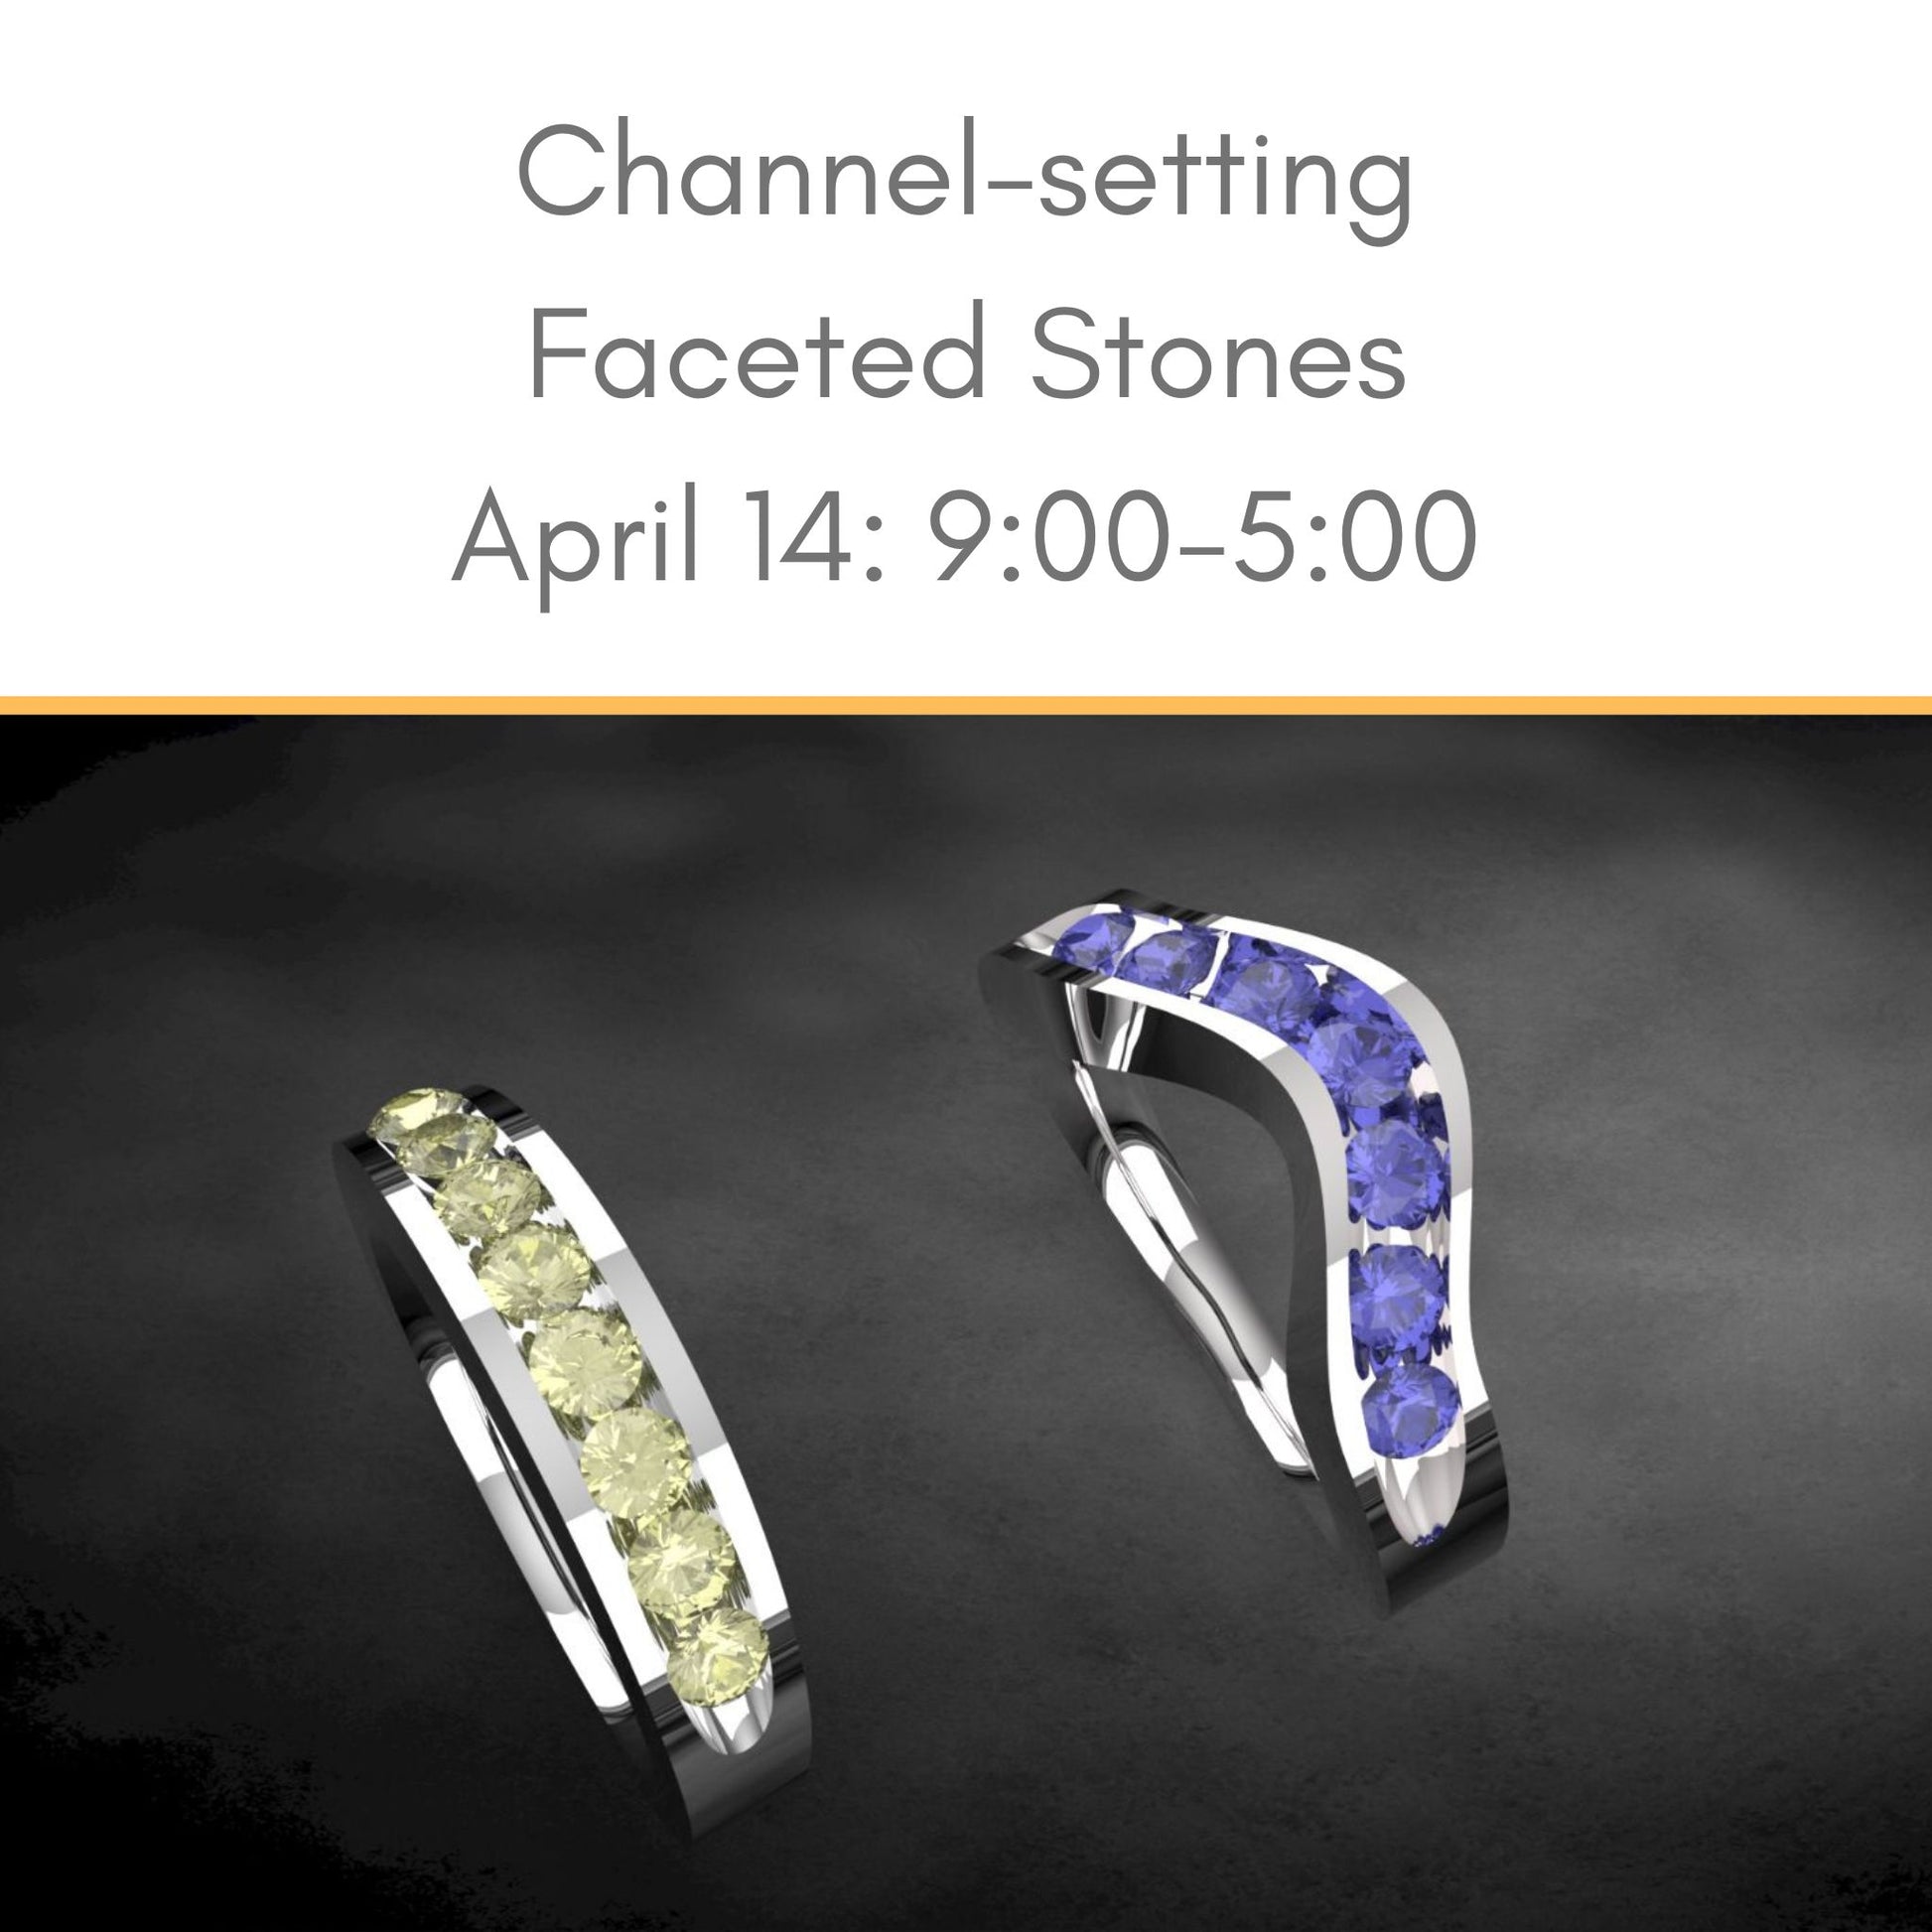 Channel-setting faceted stones April 14 at Silver Peak Studio